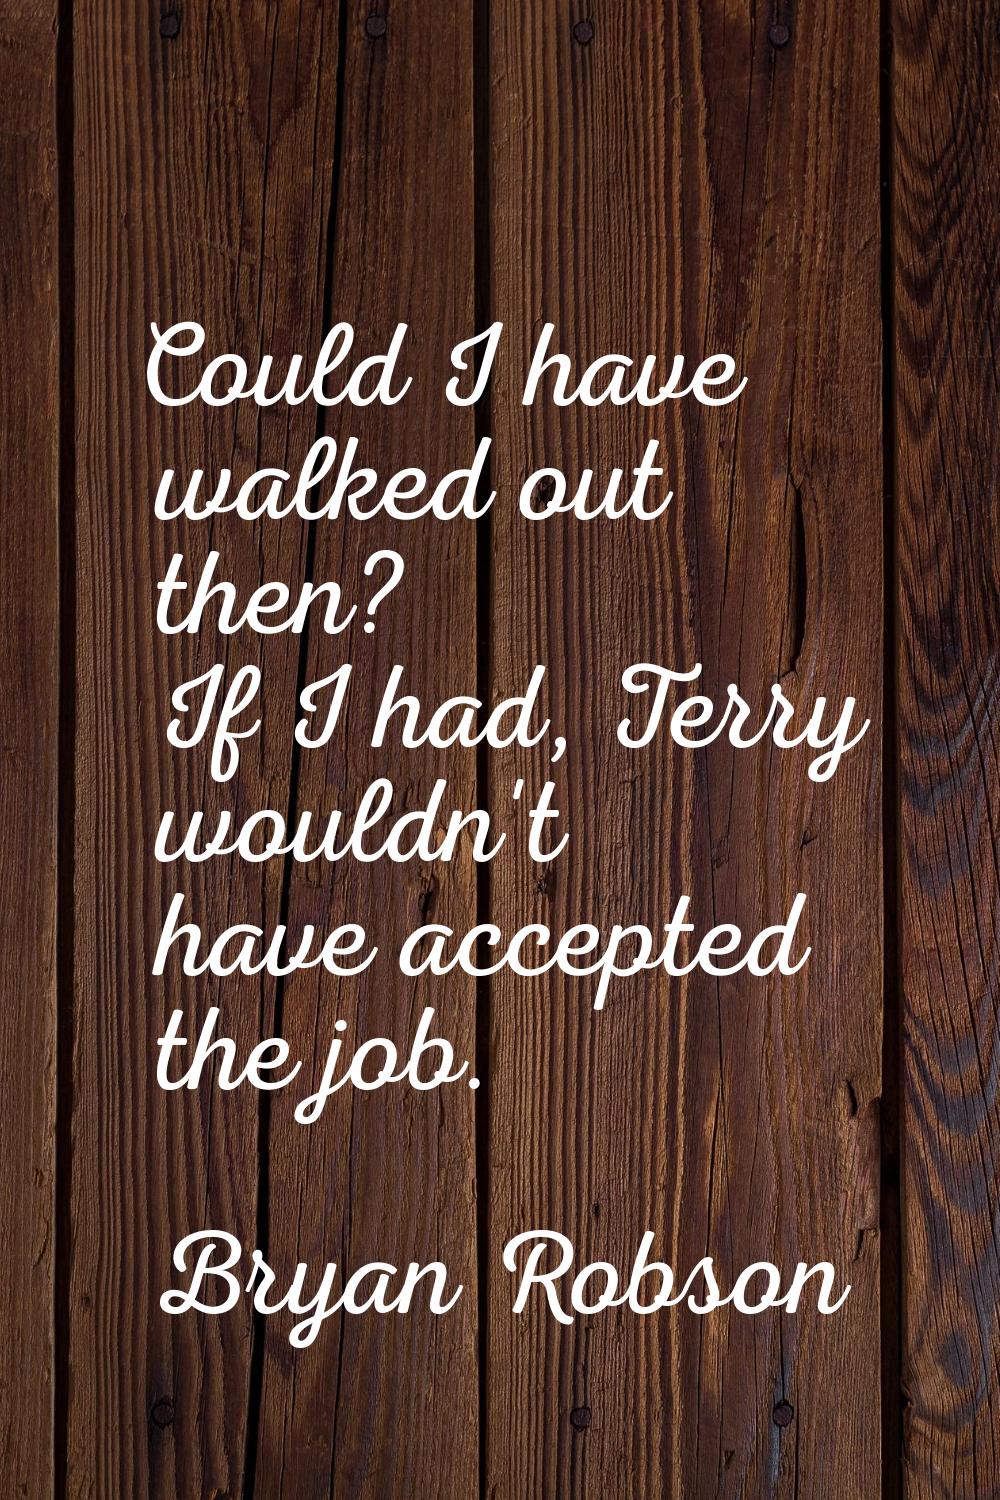 Could I have walked out then? If I had, Terry wouldn't have accepted the job.